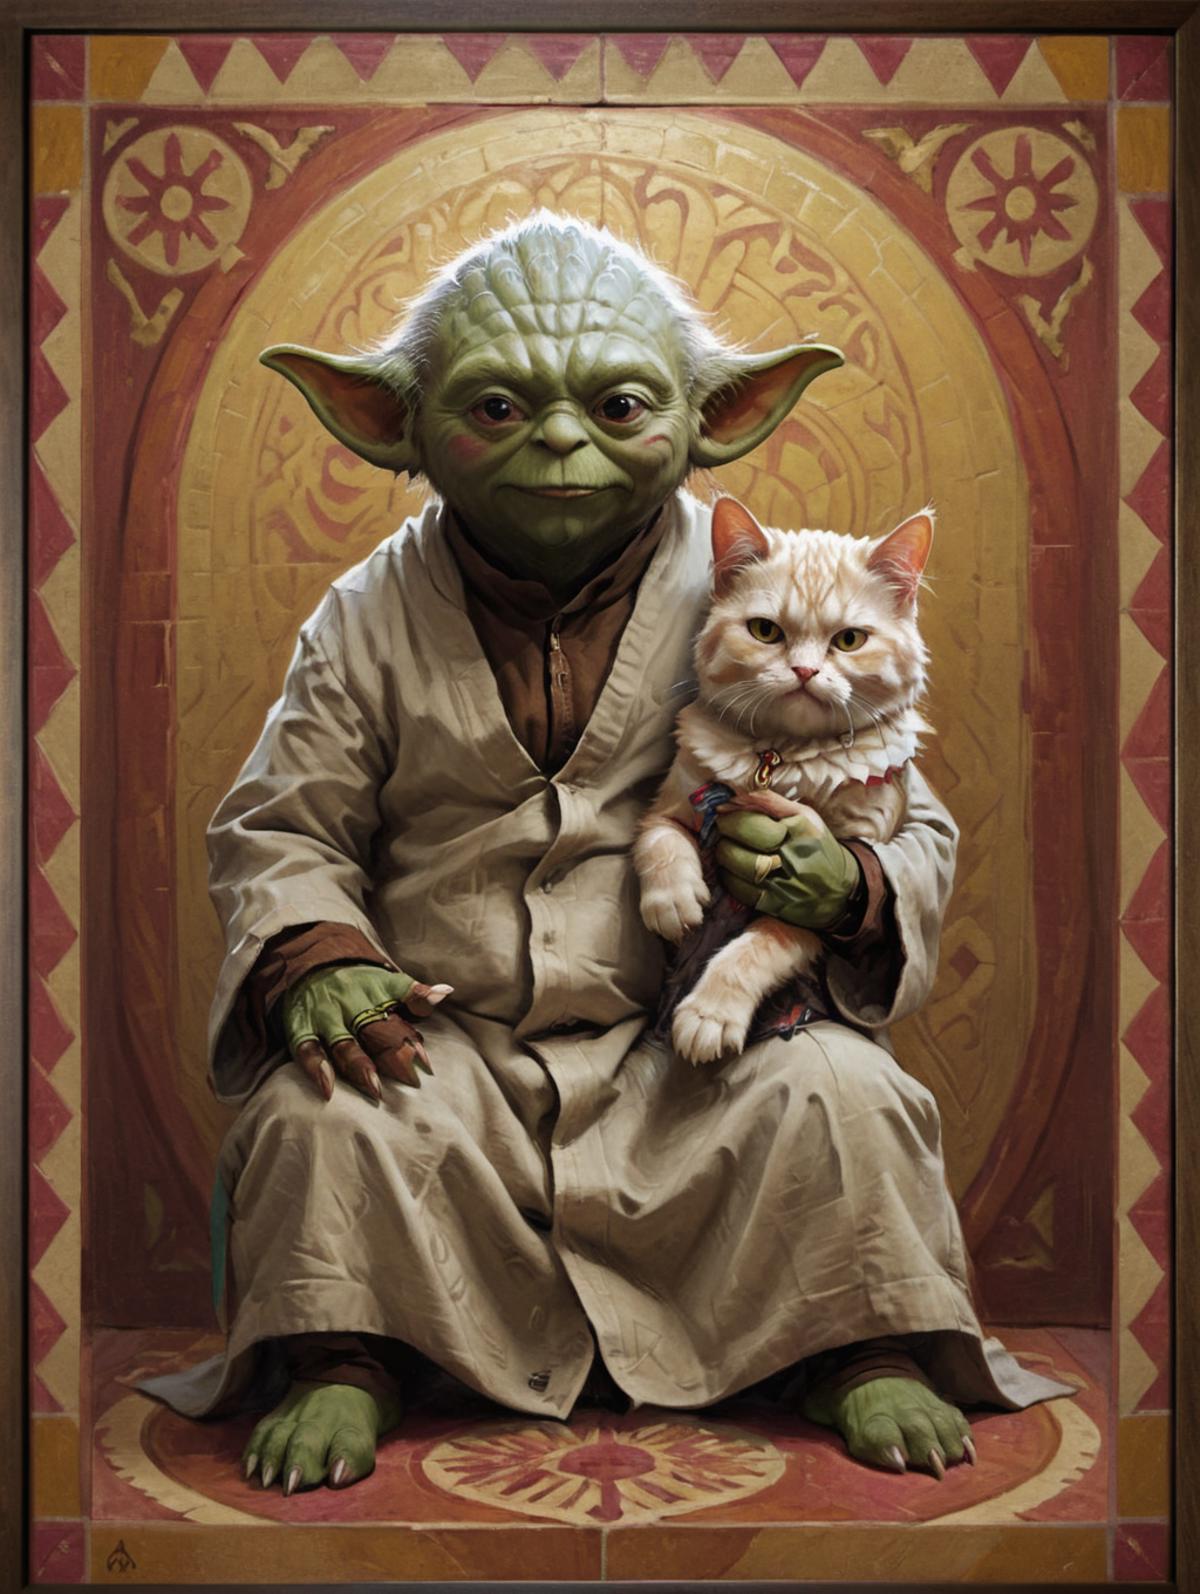 A painting of Yoda holding a cat.